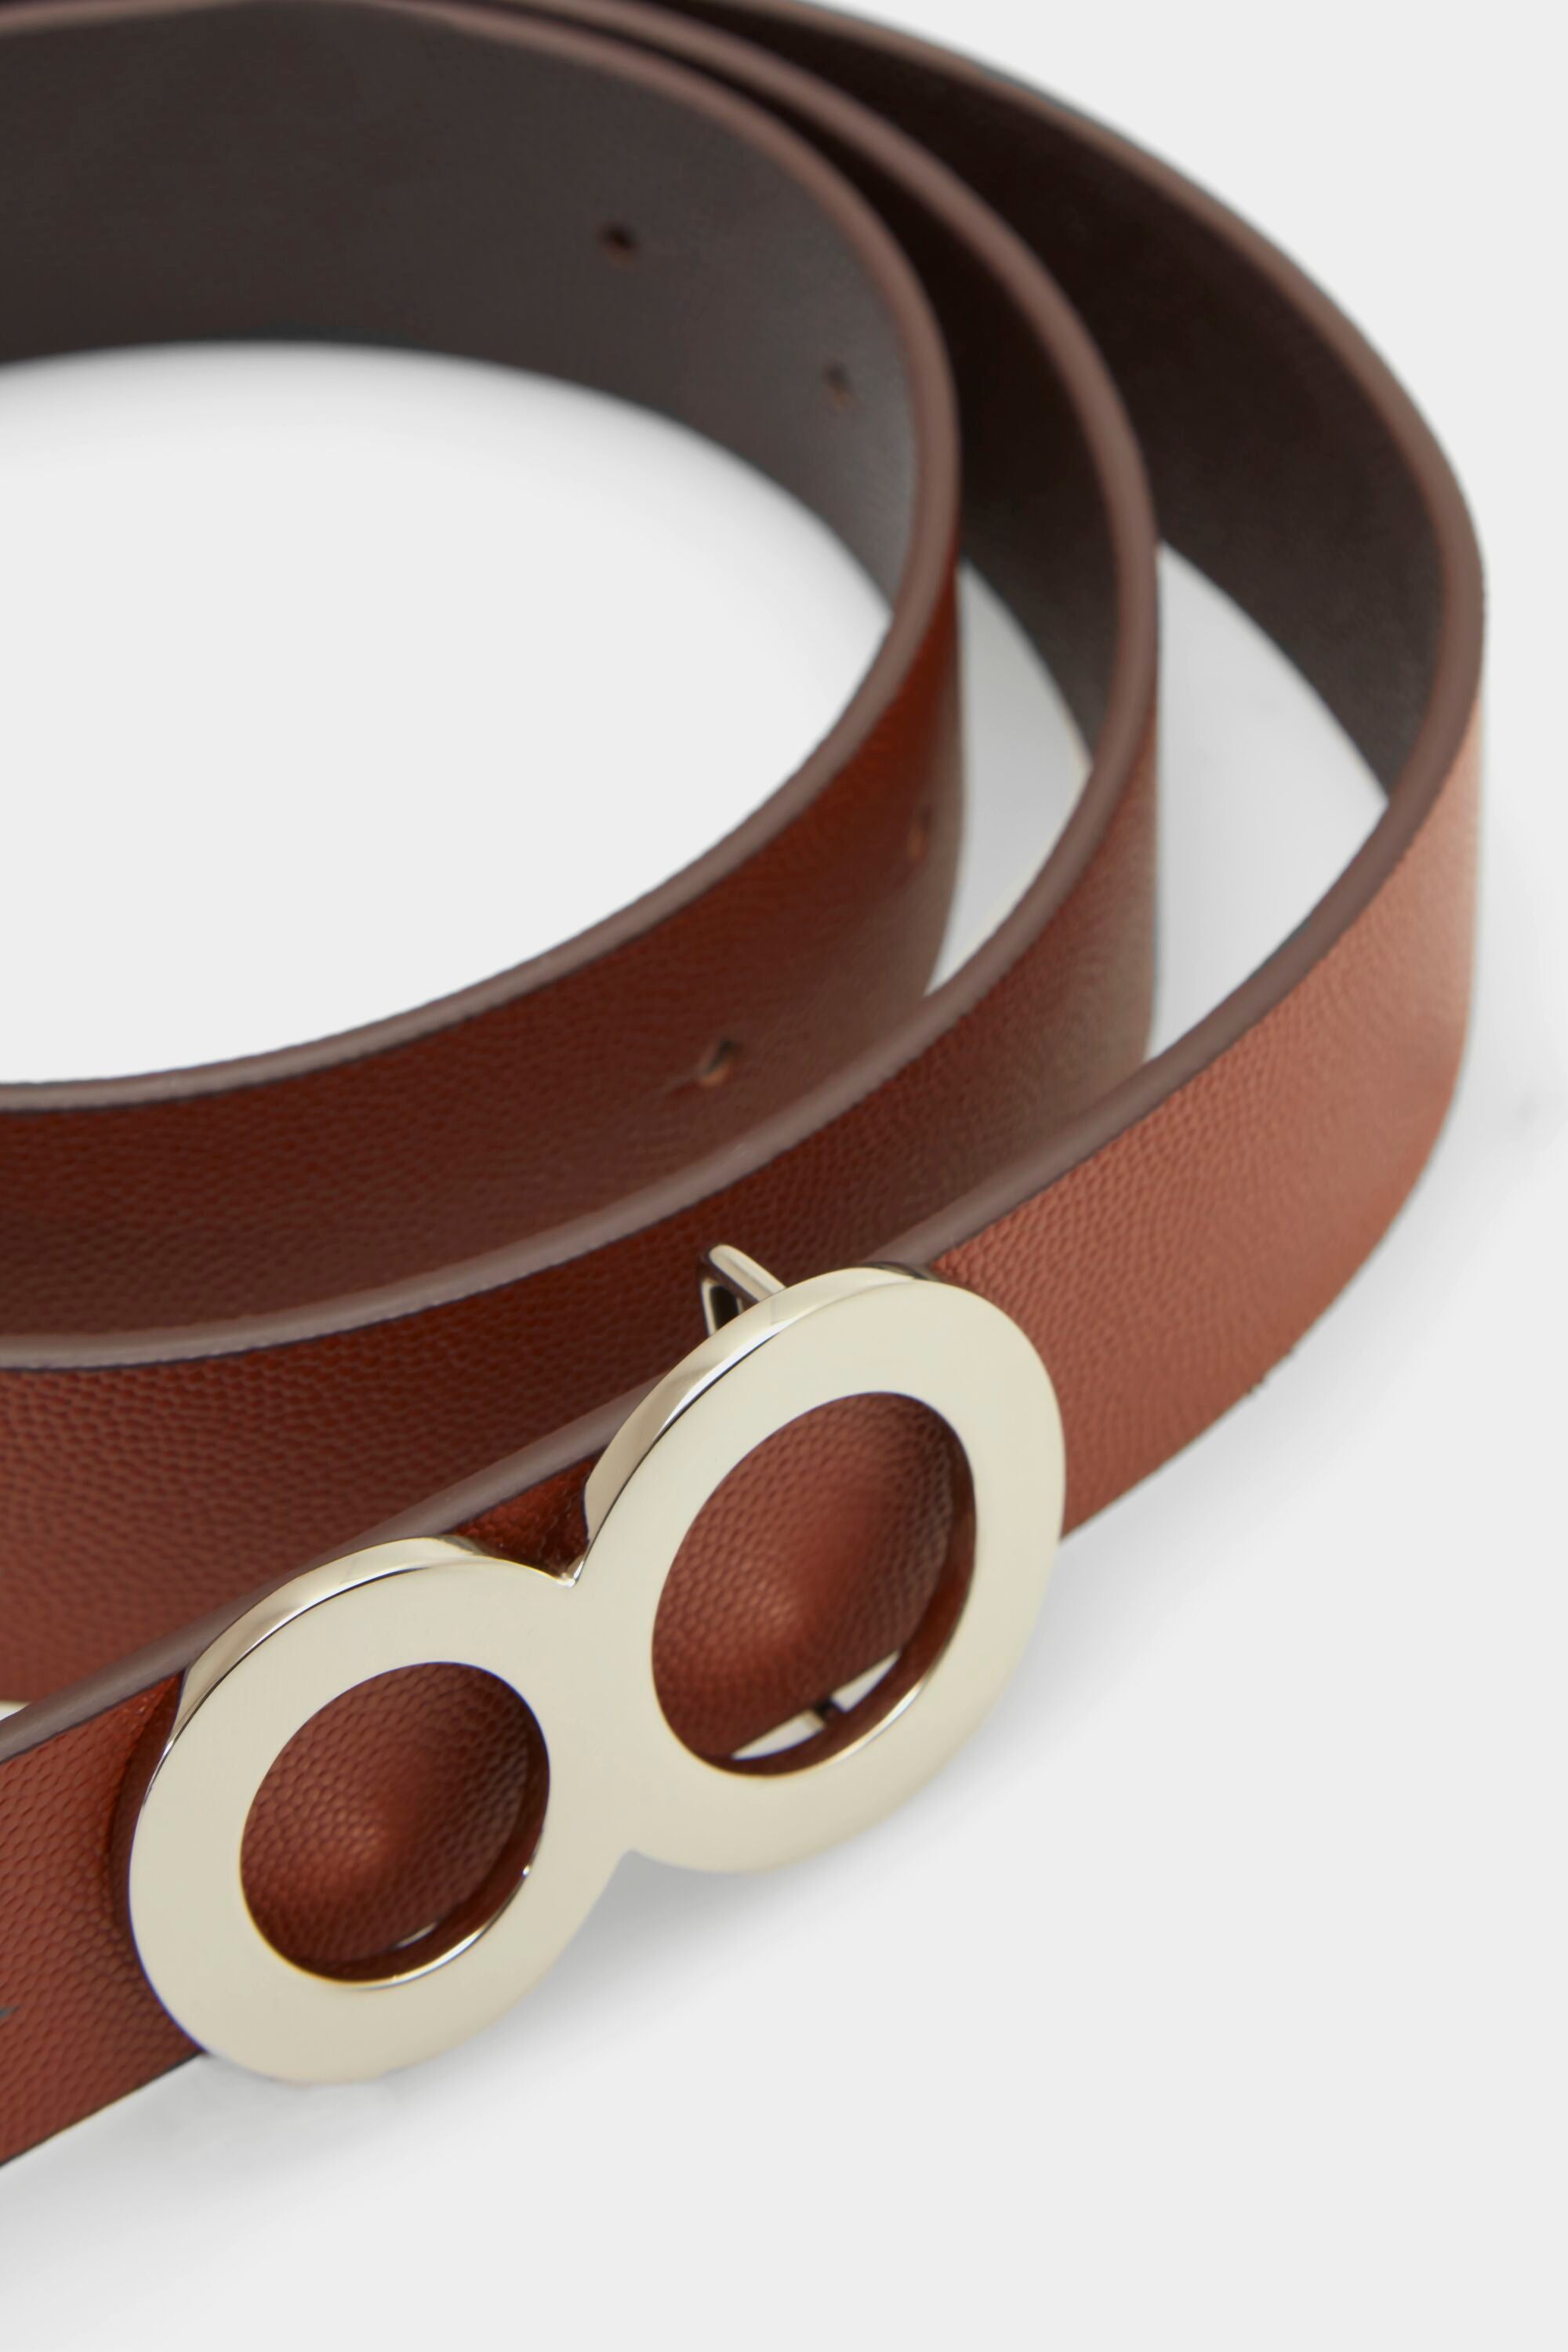 OCHO LEATHER REVERSIBLE BELT brown - Purificacion Garcia Luxembourg